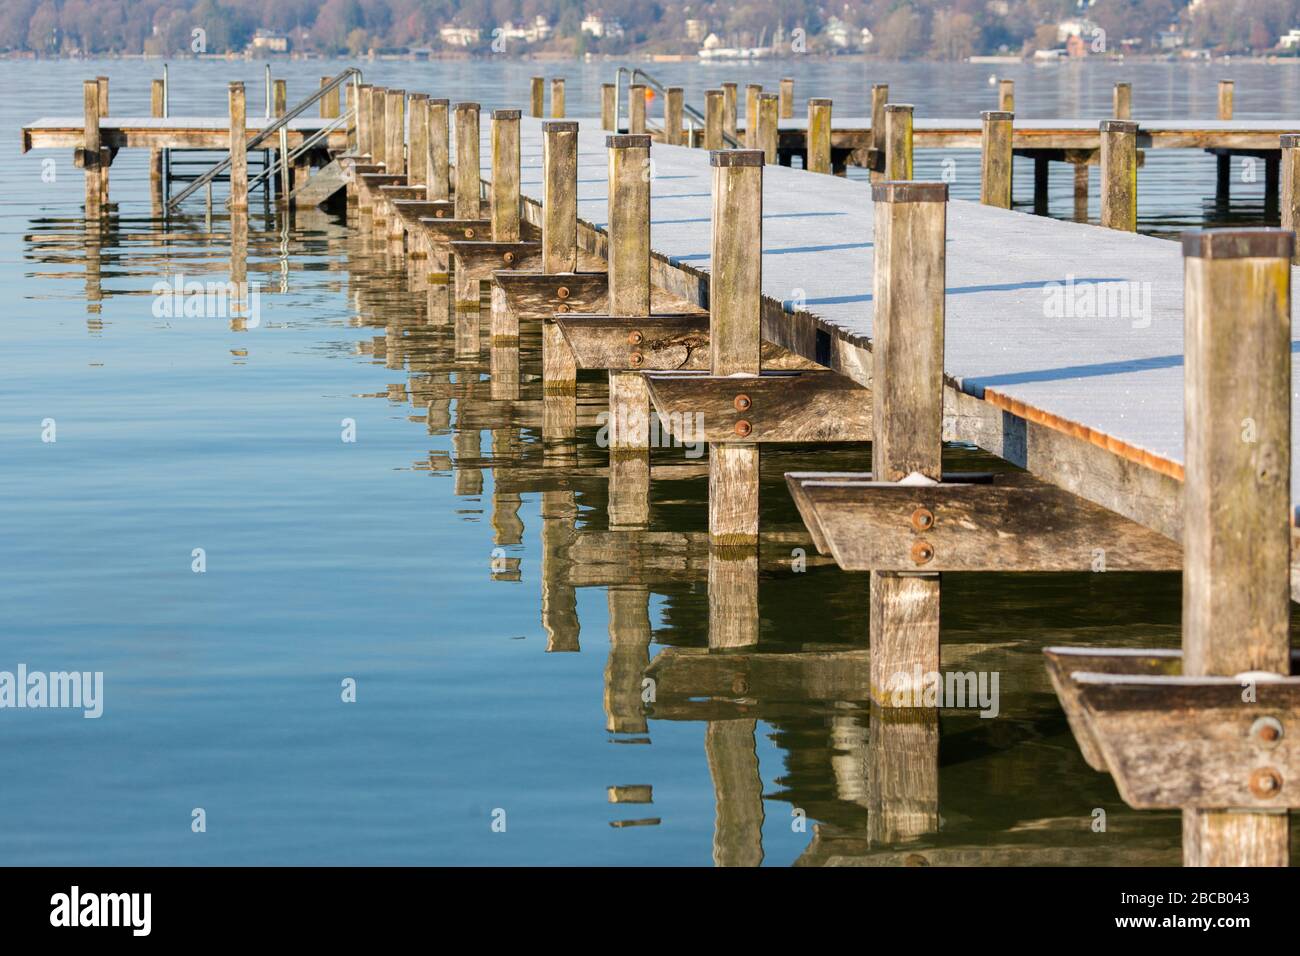 View along the side of a wooden, frost covered jetty at Starnberger See (Lake Starnberg). With many wooden piles and corresponding water reflections. Stock Photo